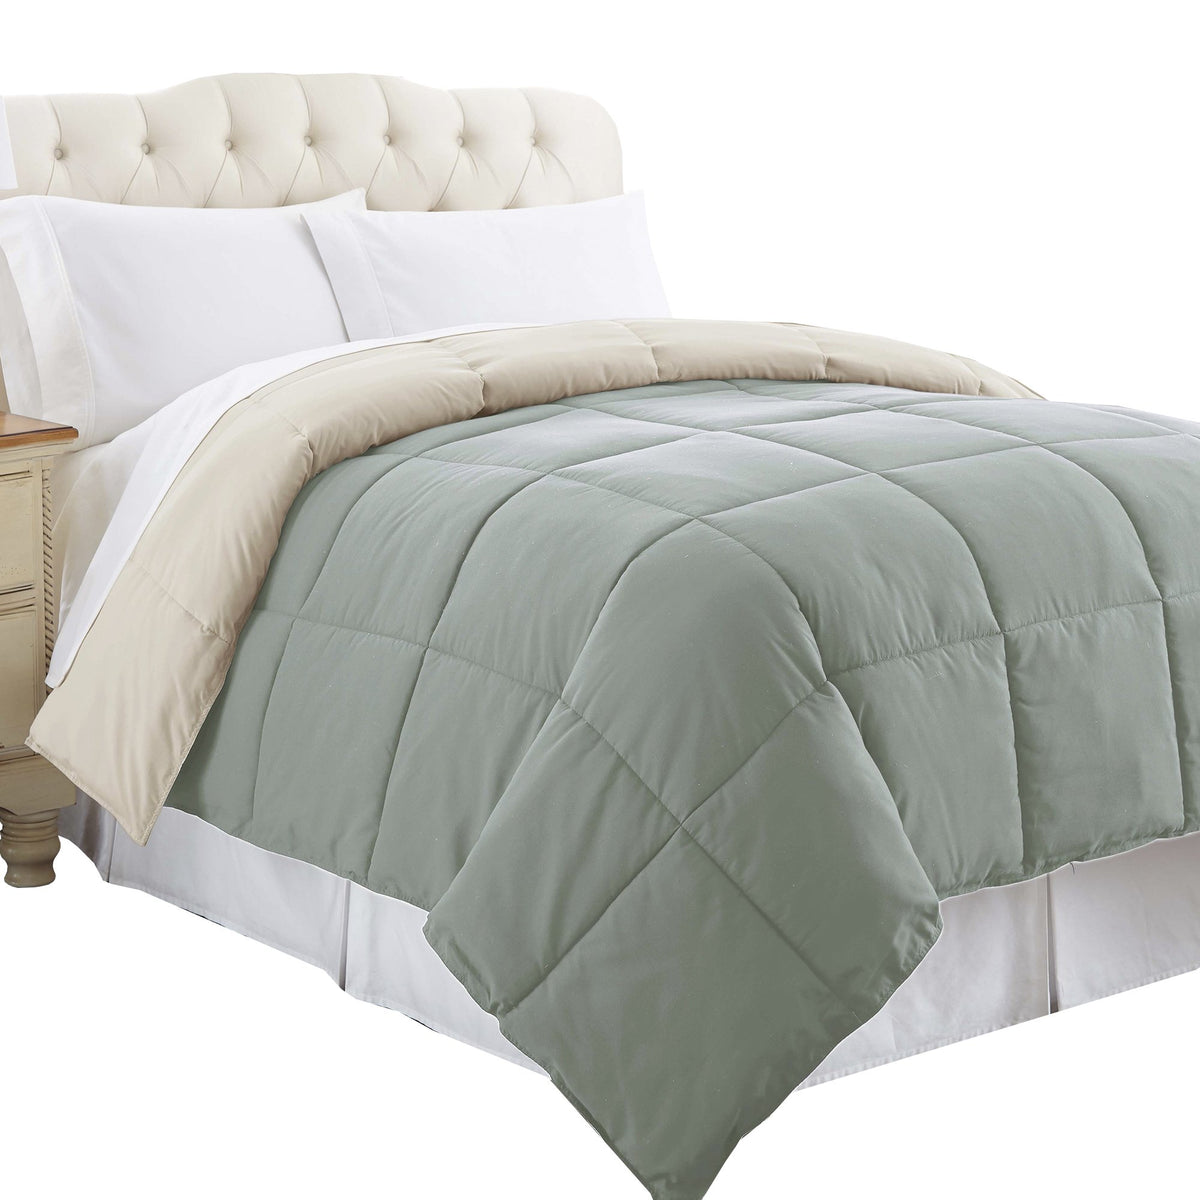 Genoa Twin Size Box Quilted Reversible Comforter , Gray and Beige - BM202044